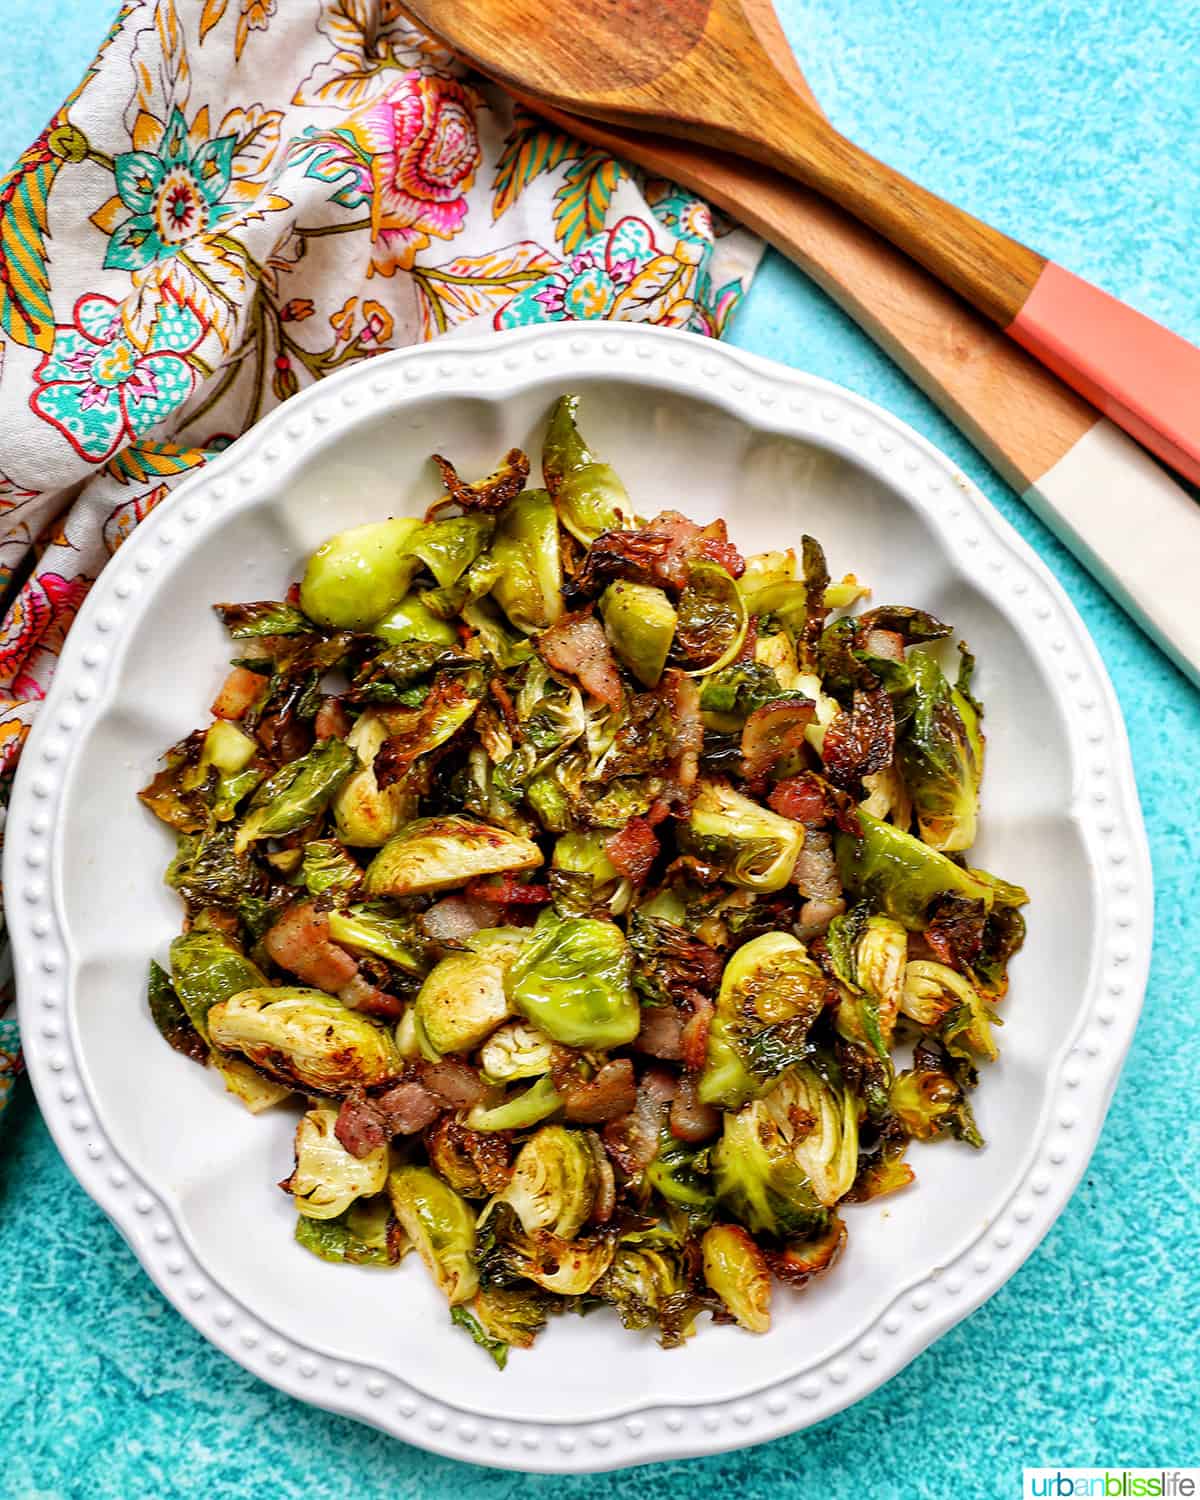 bowl of brussels sprouts with bacon and set of wooden serving spoons.